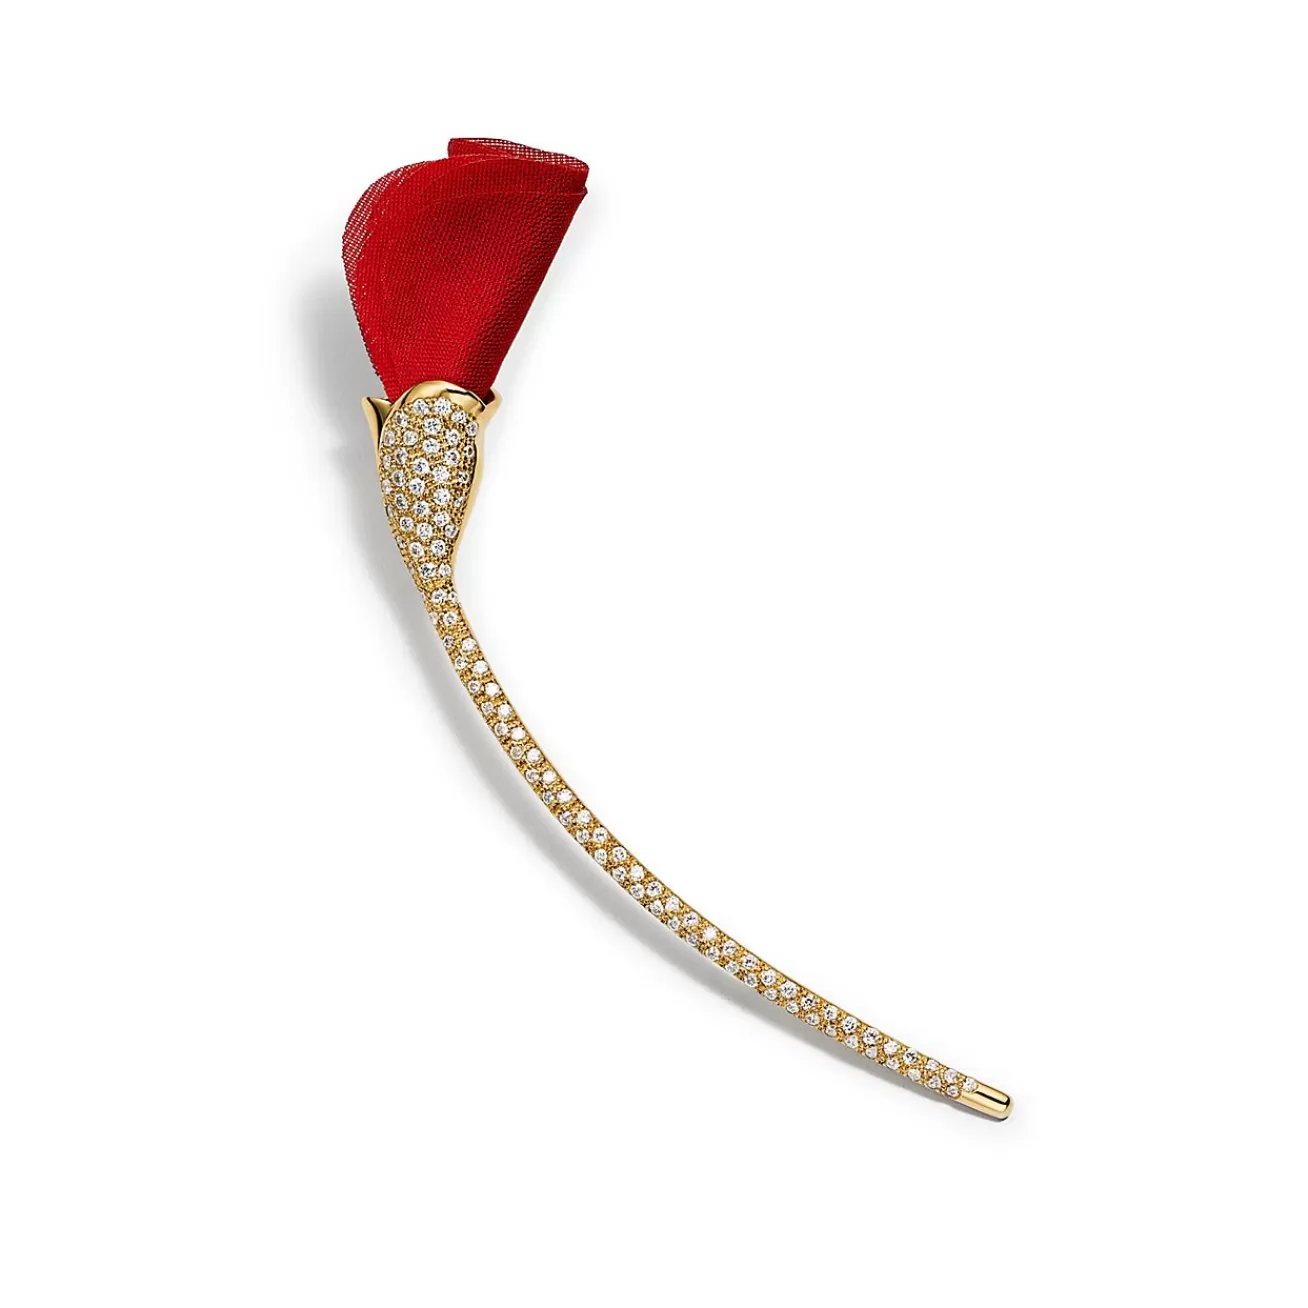 Tiffany & Co. Elsa Peretti® Amapola Brooch in Yellow Gold with Red Silk | ^ Brooches